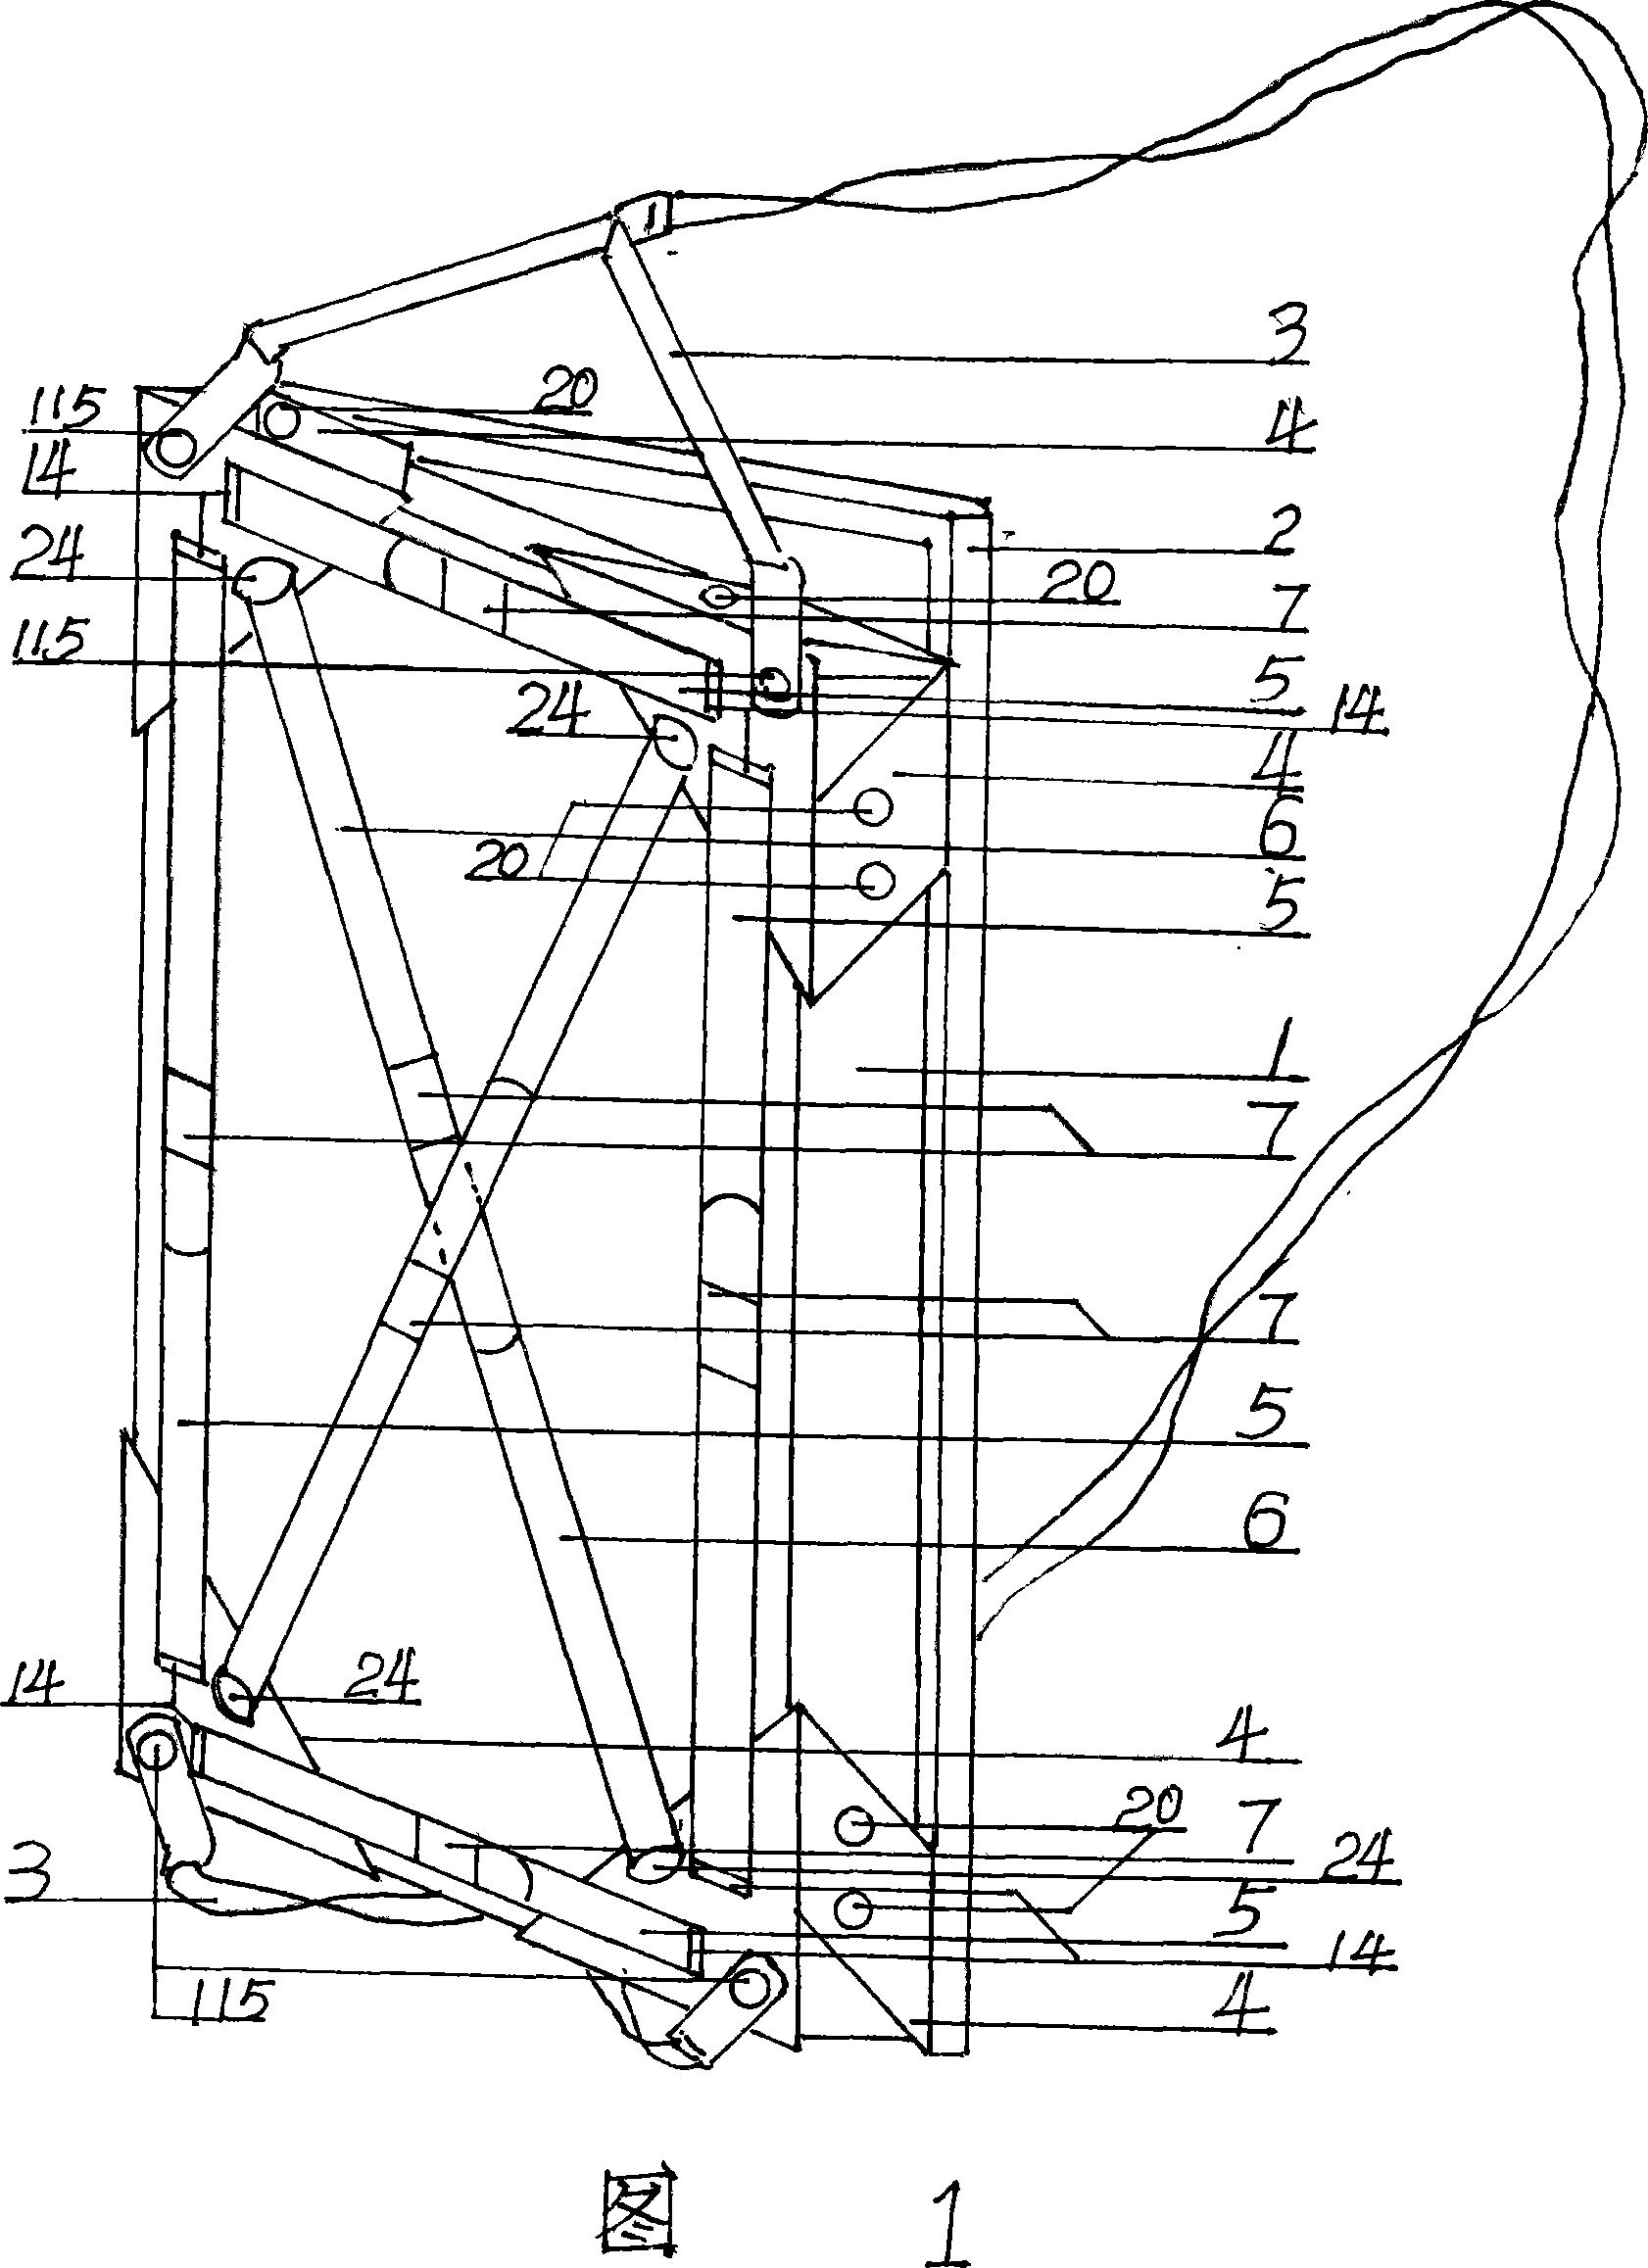 Device for binding gallus of portable notebook type computer